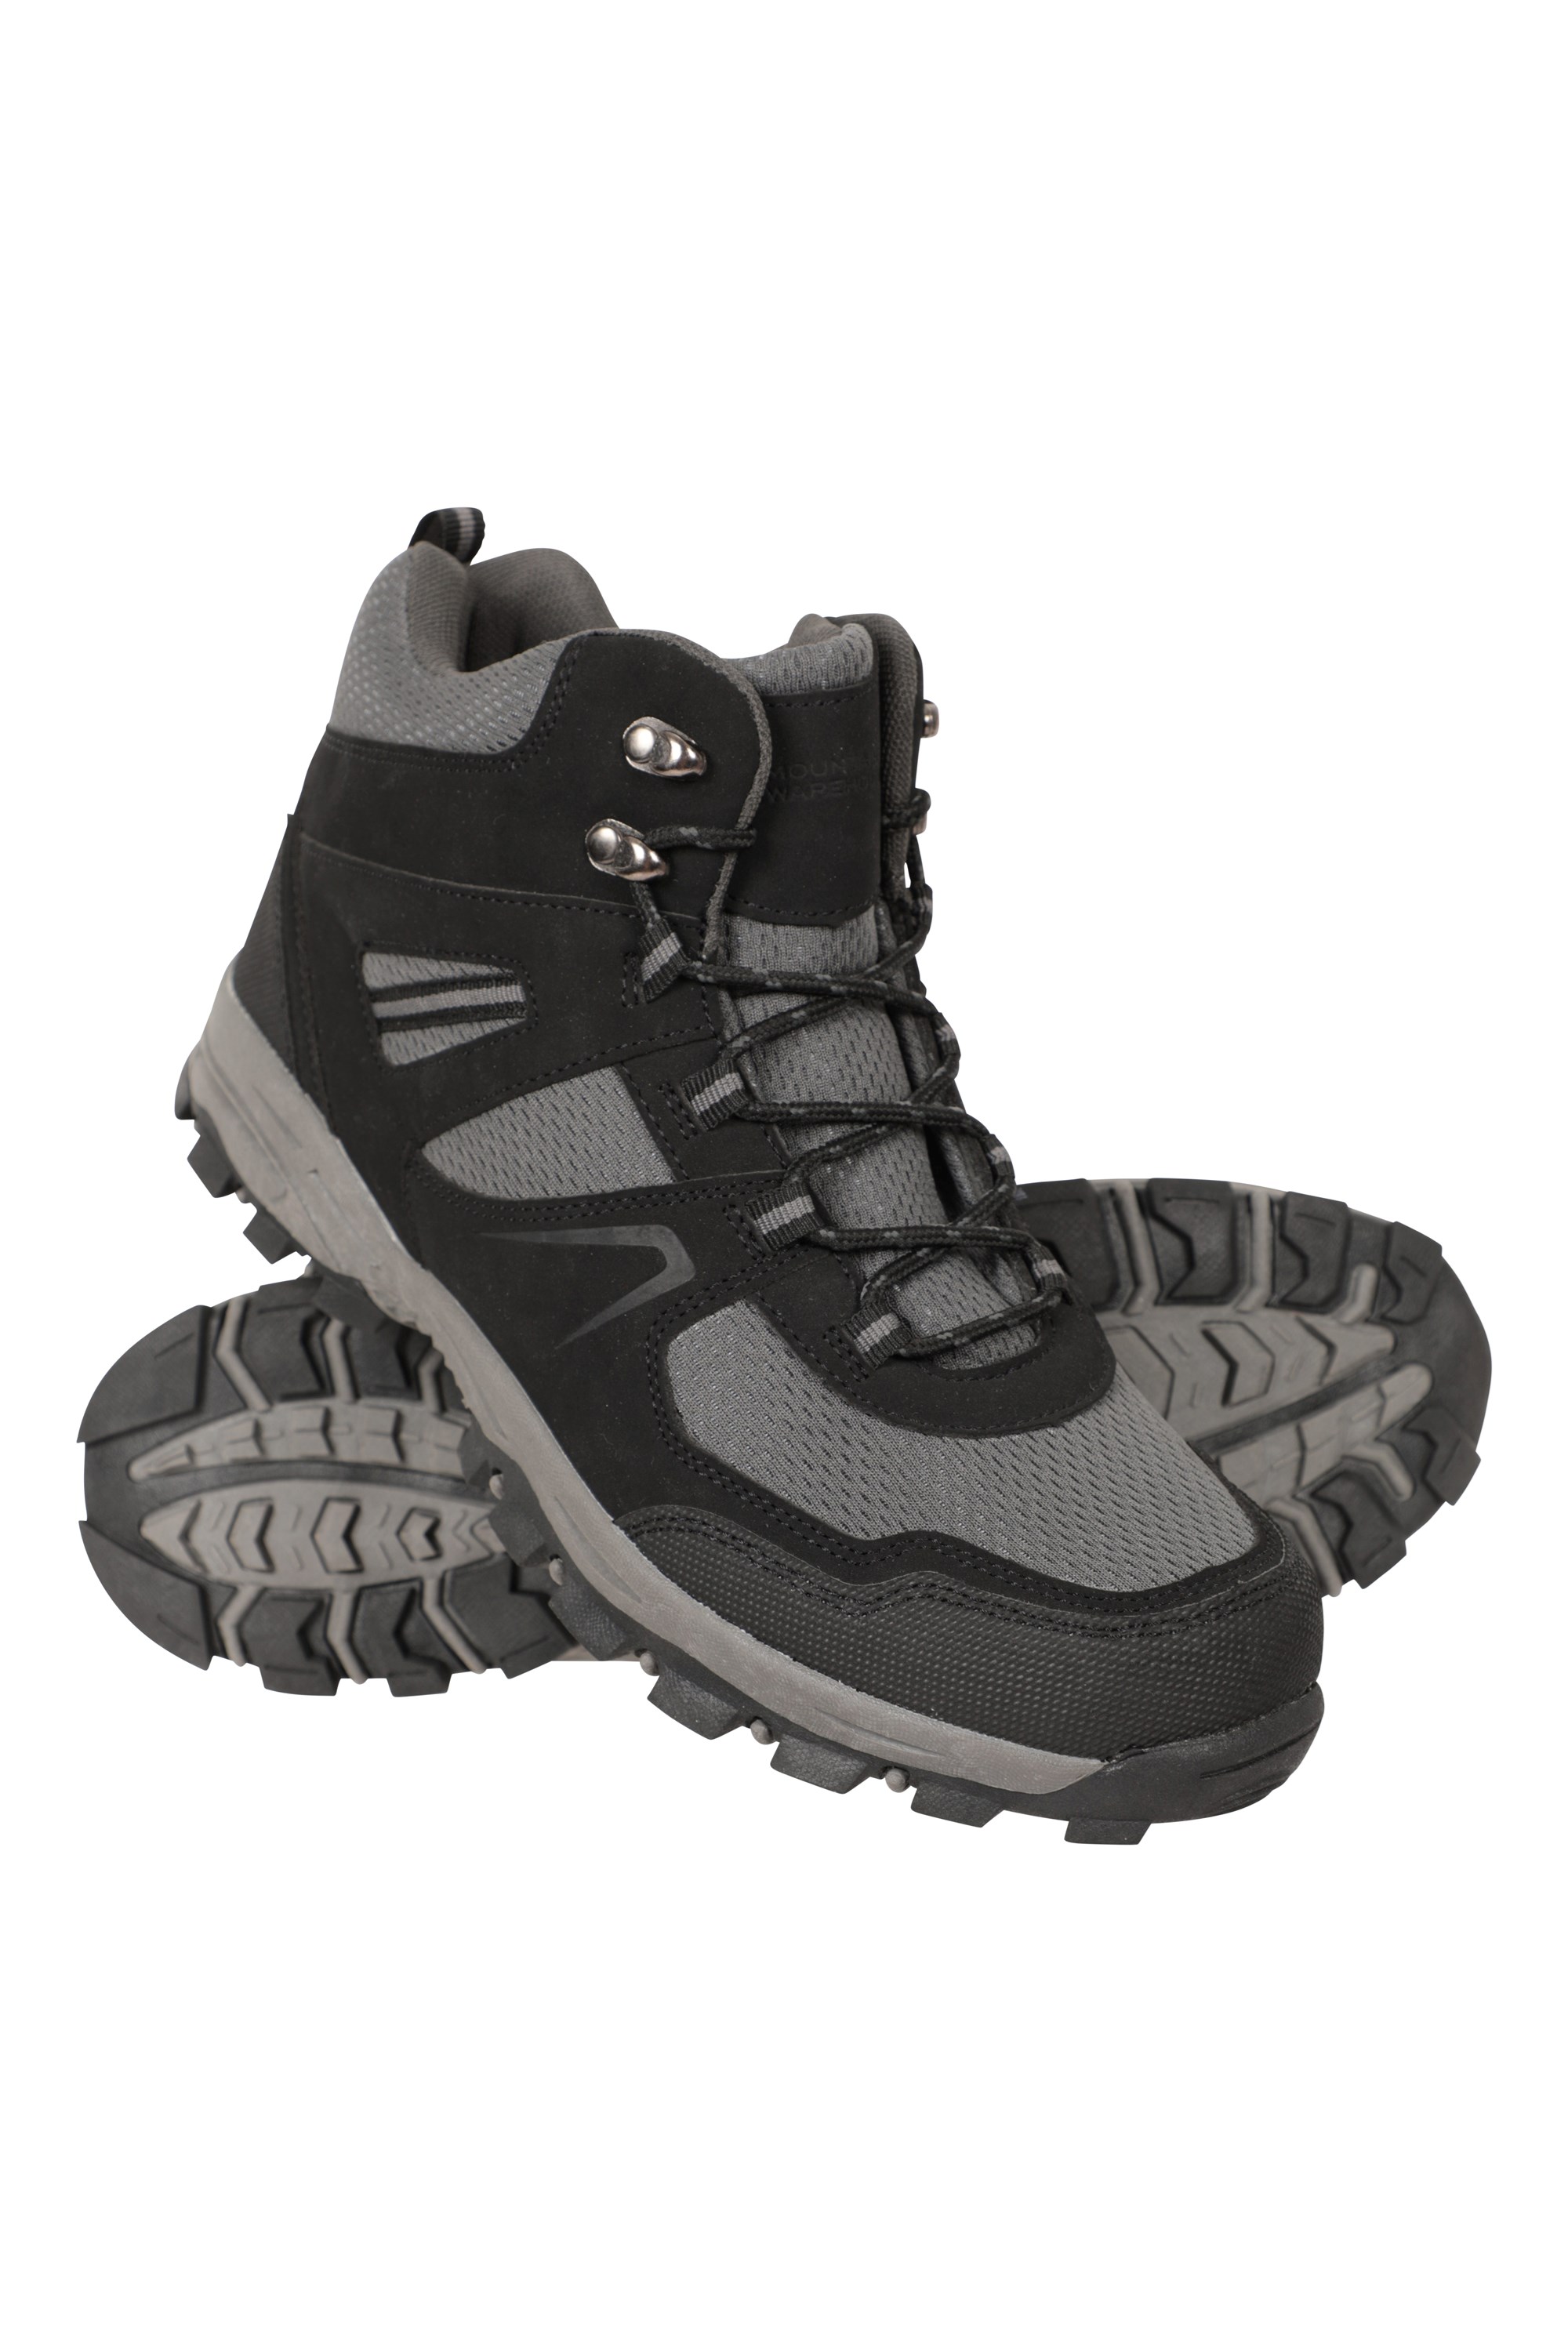 Mcleod Wide Fit Mens Walking Boots | Mountain Warehouse GB